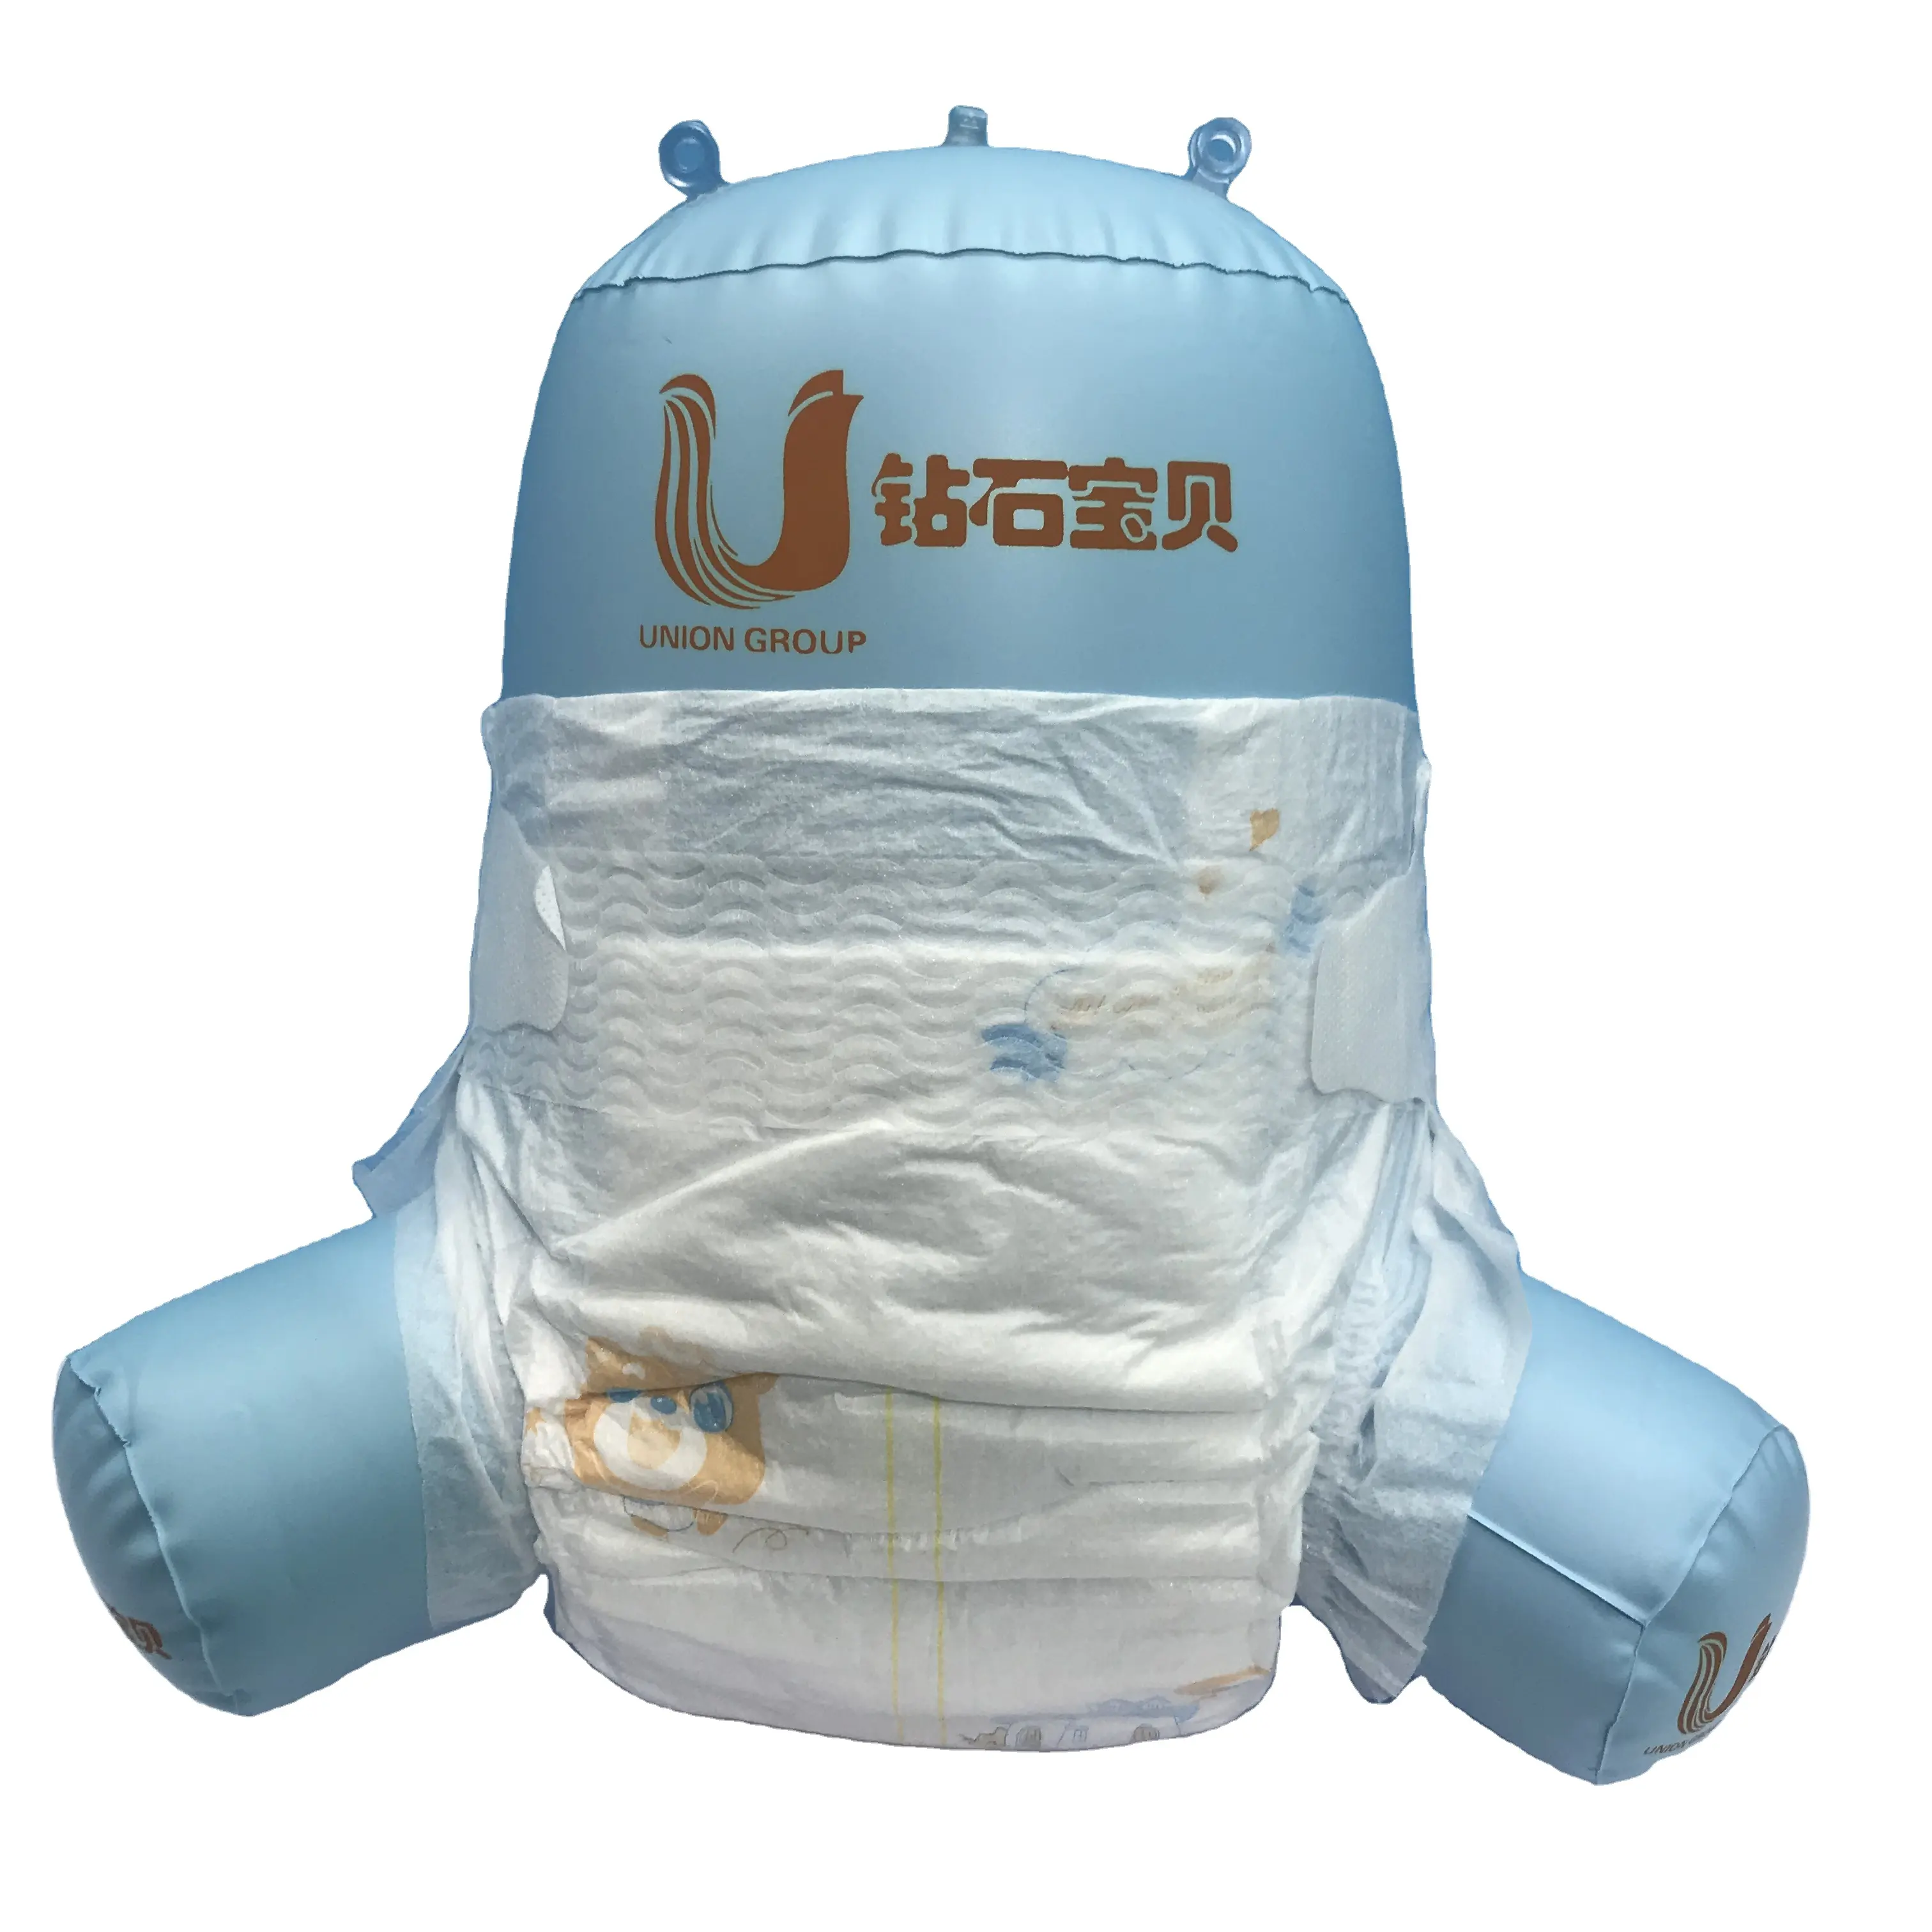 distributor wants hot sale baby diaper baby products manufacturer in china